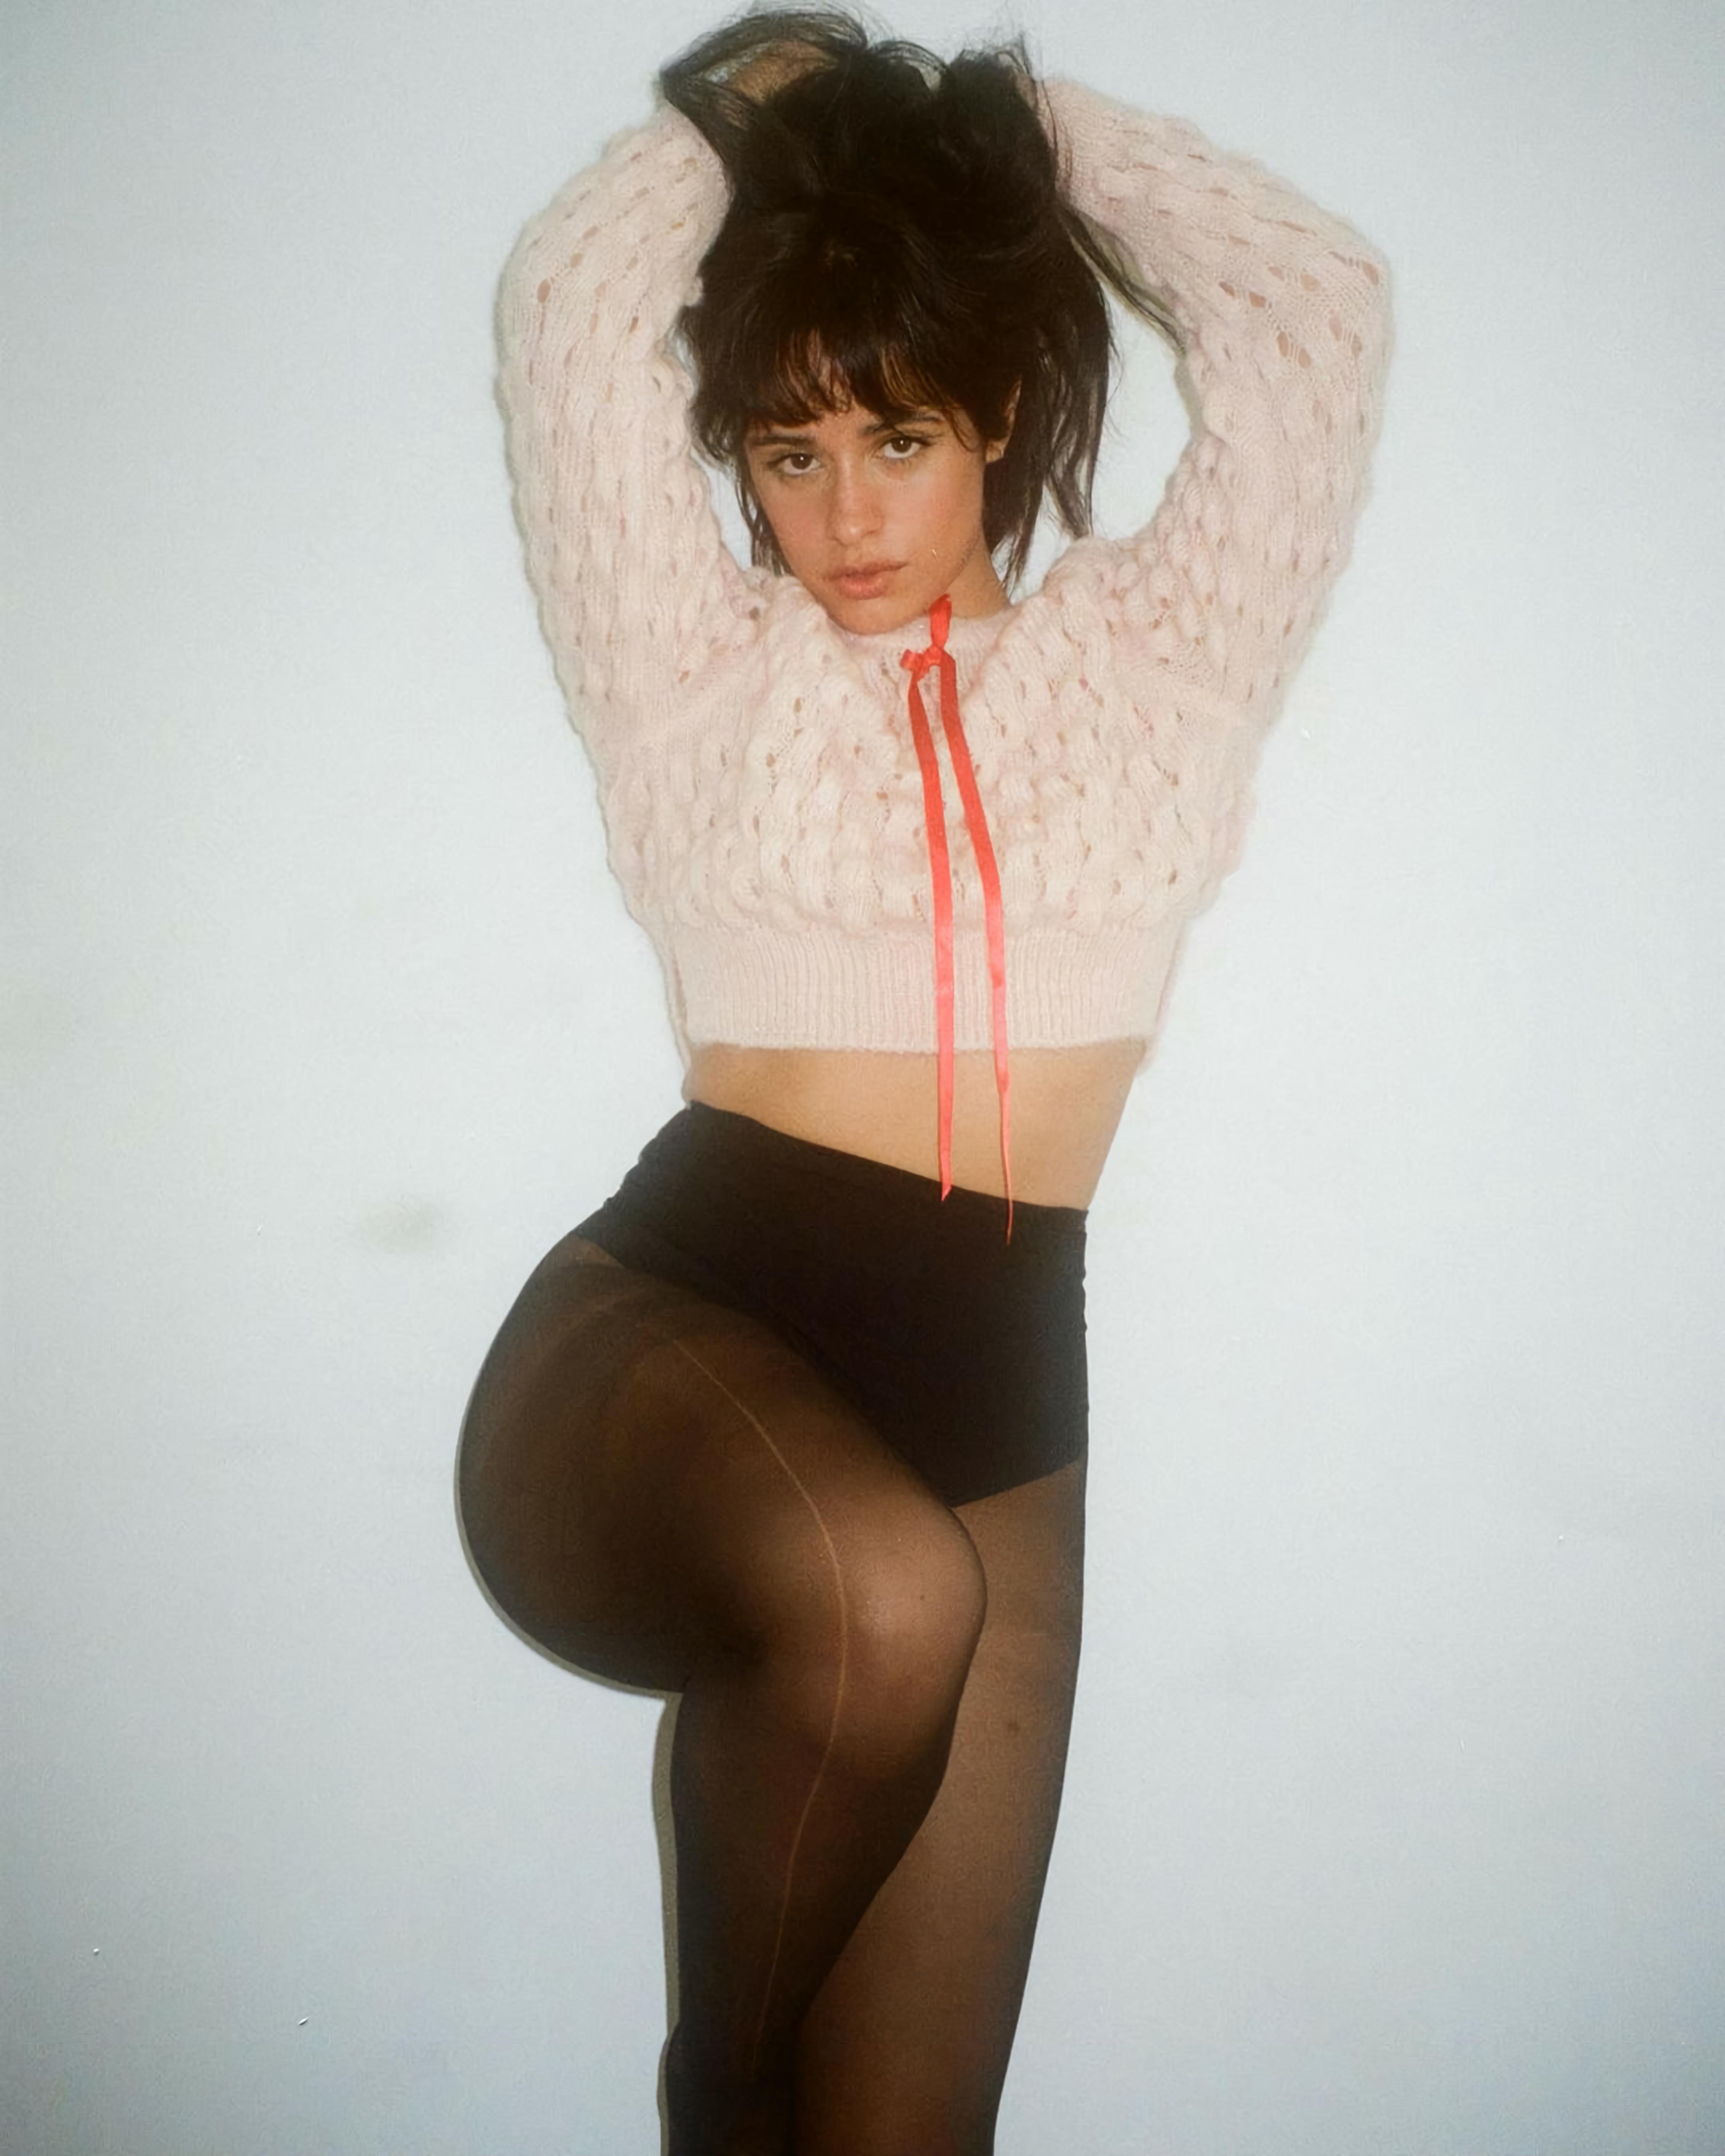 Camila Cabello Shows Off in a Crop Top and Stockings! - Photo 3